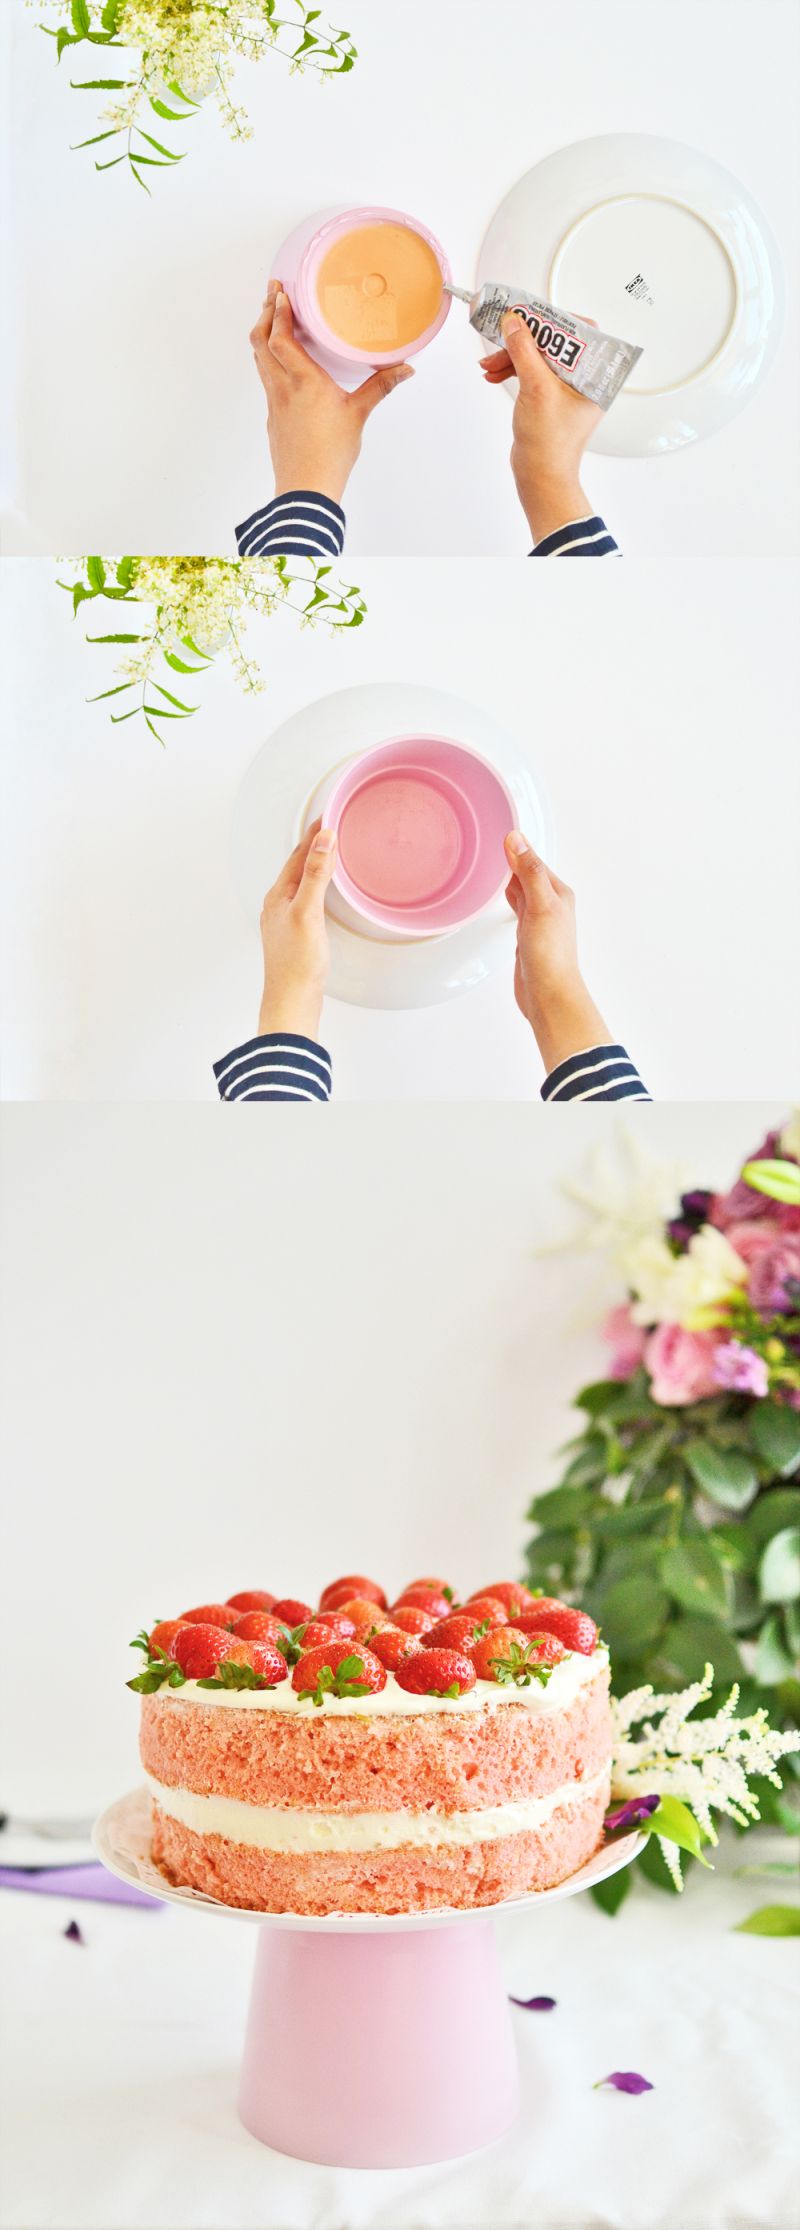 Diy cake stand from planter glue